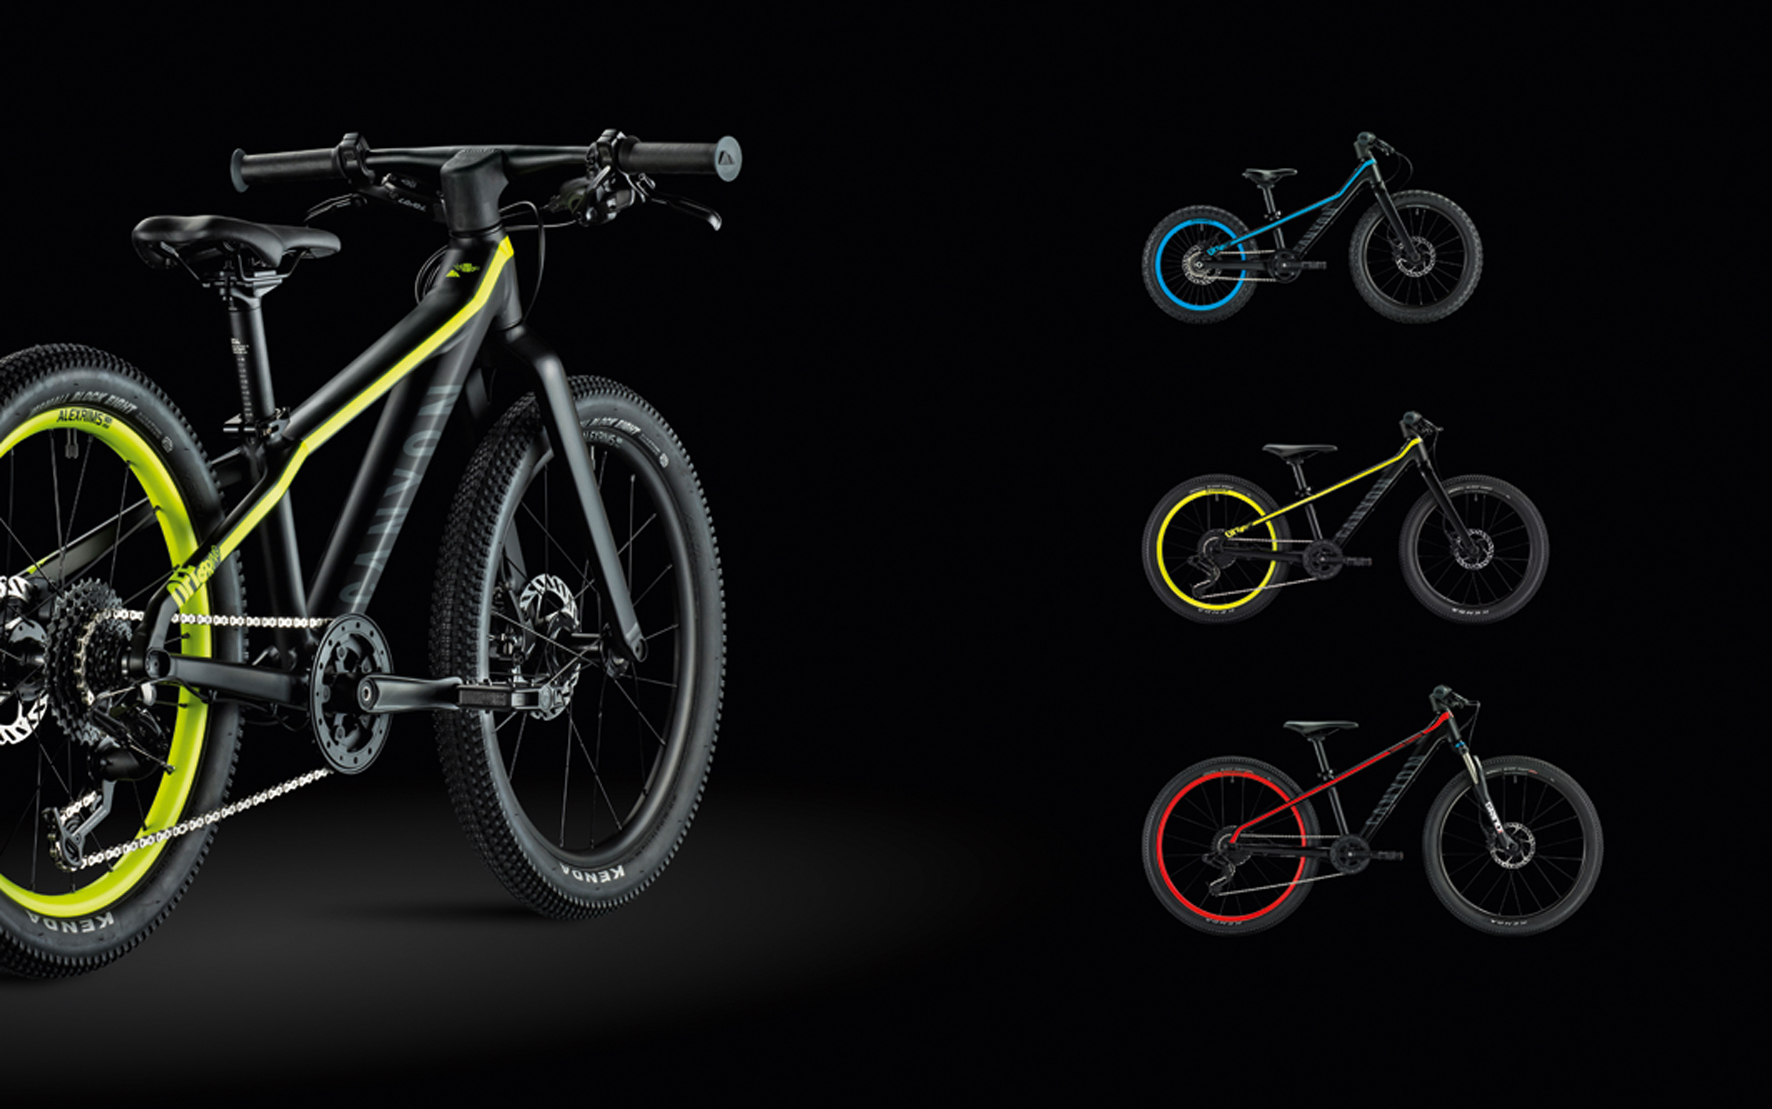 Canyon Bikes - Design Team of the Year - Red Dot Award